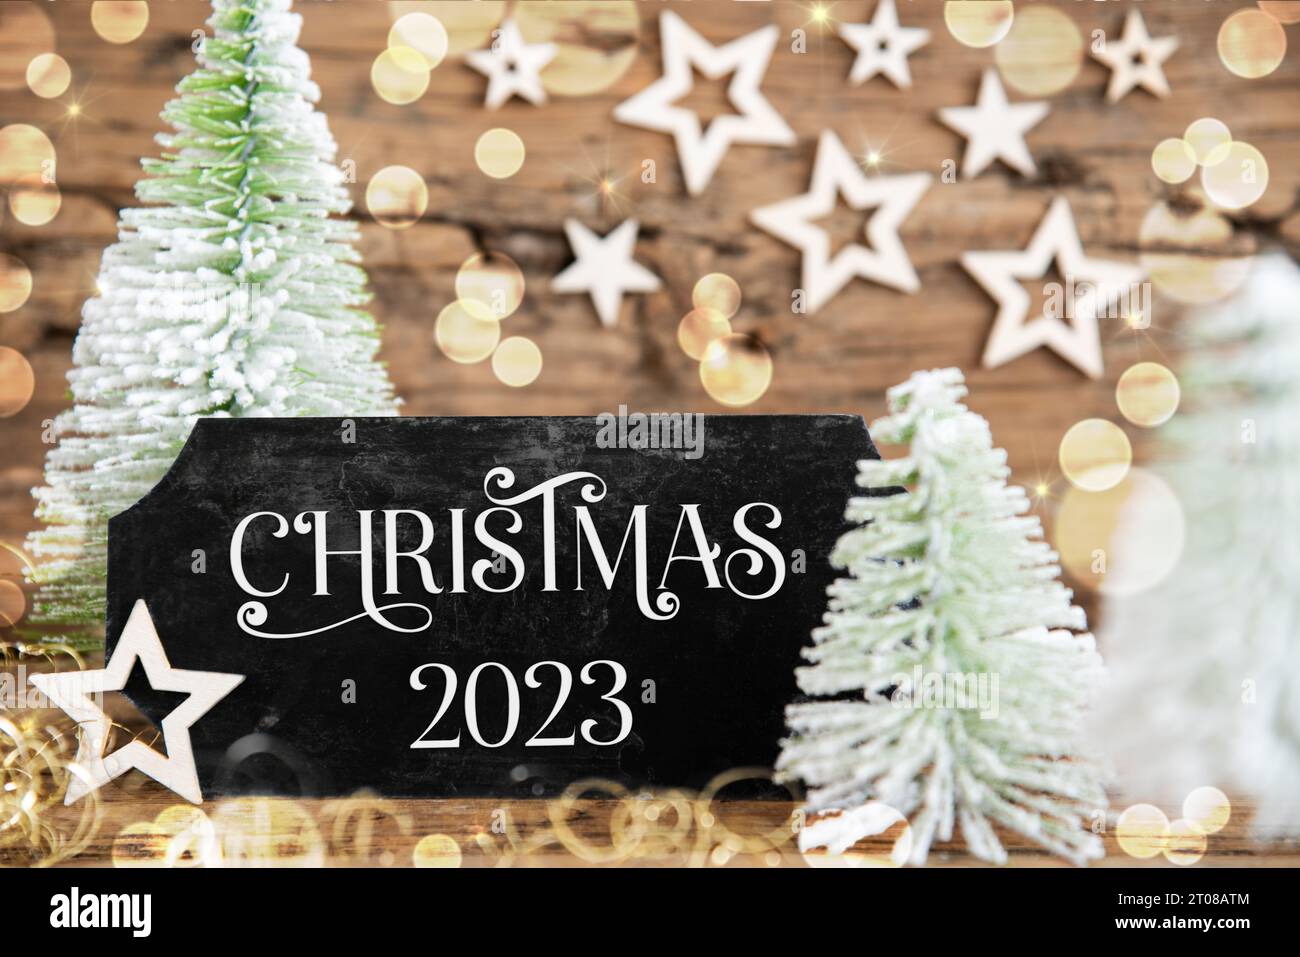 Green White Christmas Trees With Wooden Rustic Background And A Black Sign With Text Christmas 2023 Stock Photo